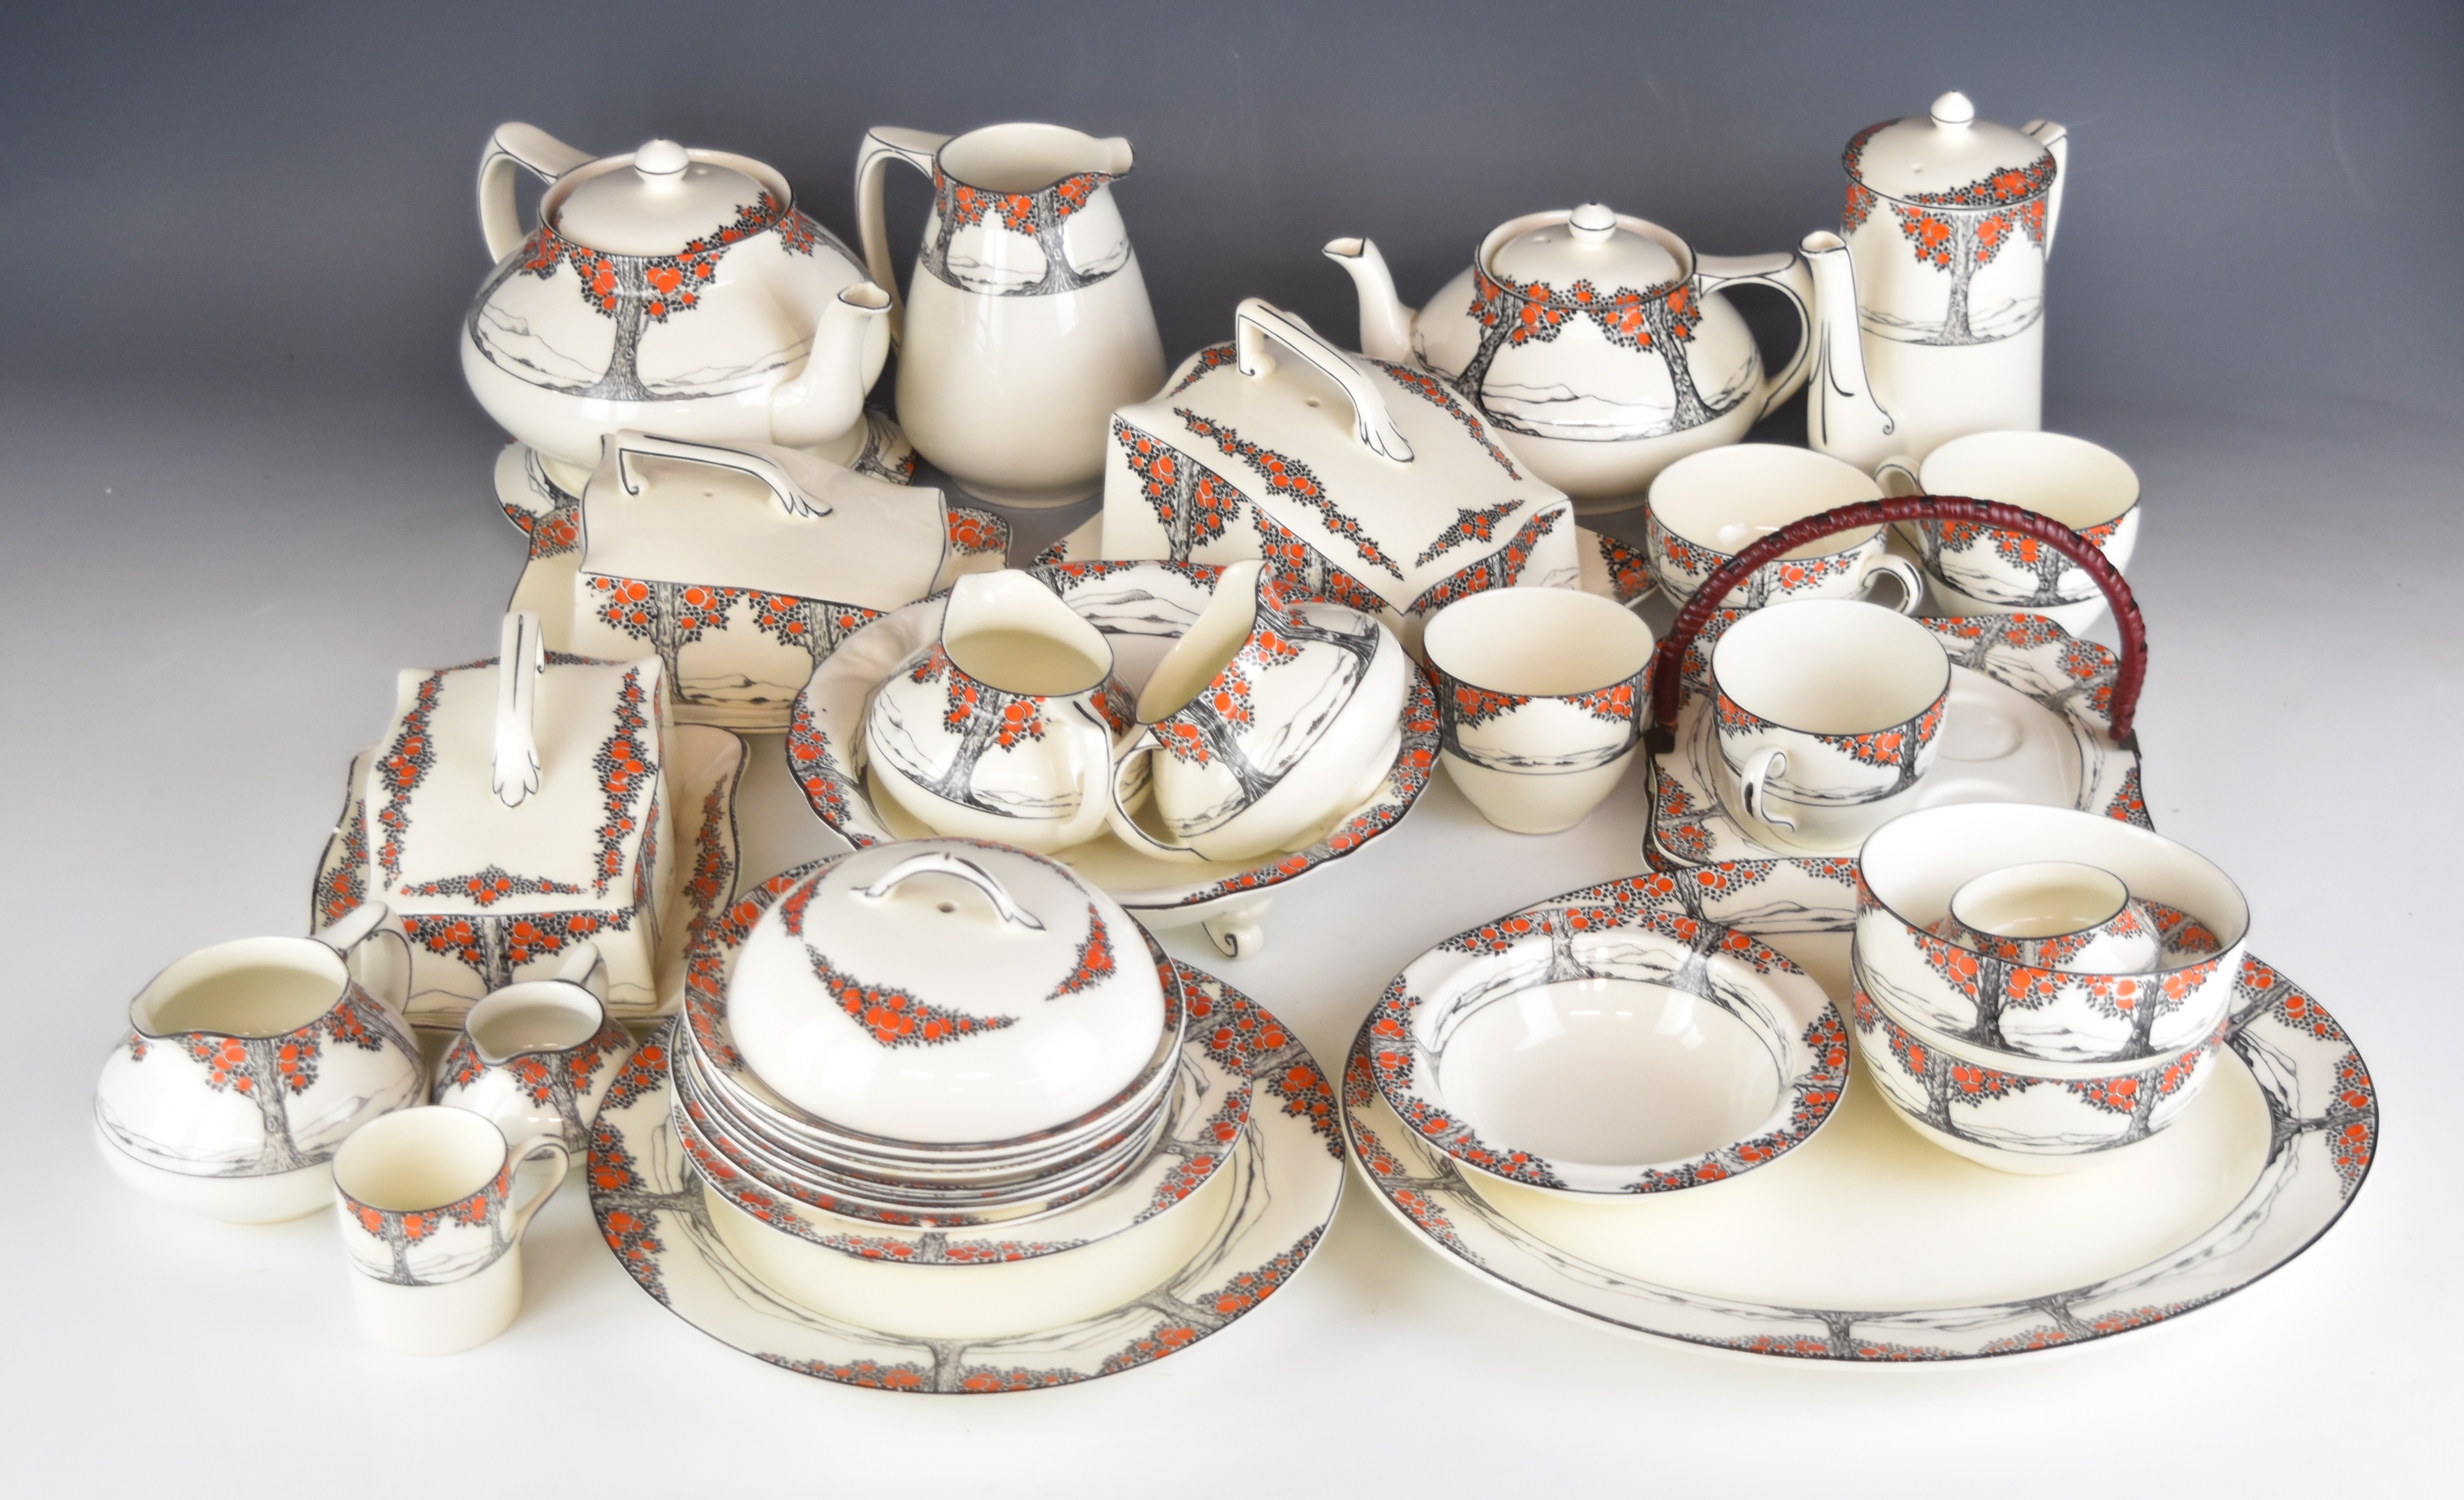 Crown Ducal dinner, tea and decorative ware decorated in the Orange Tree pattern including three tea